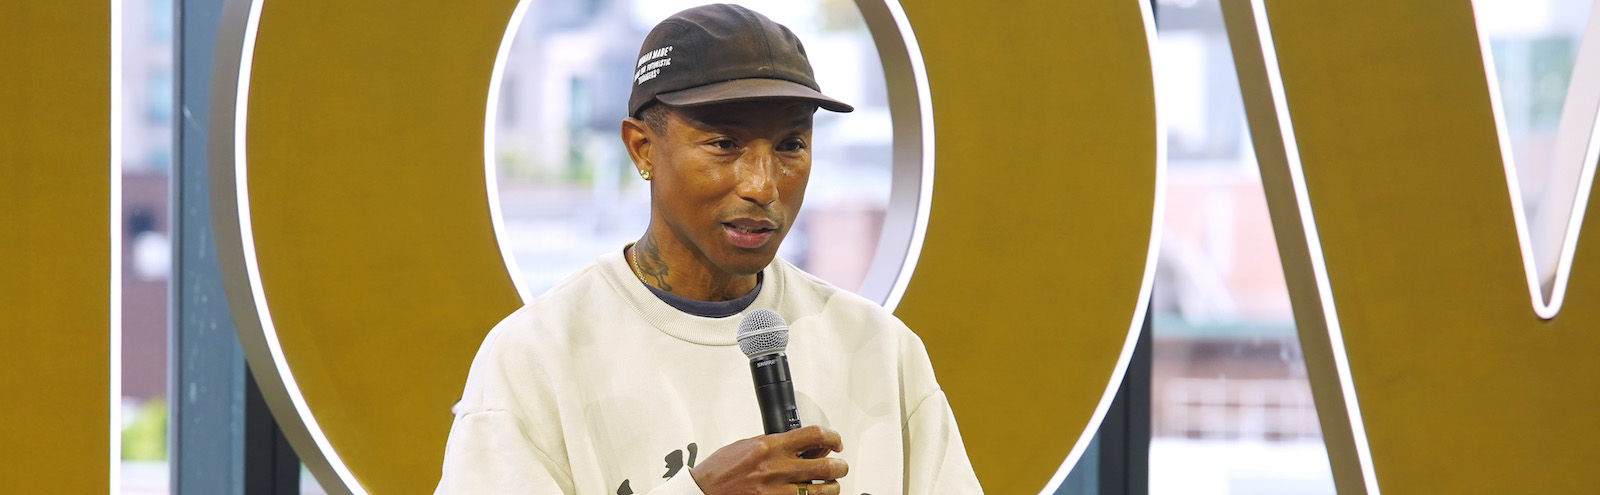 Pharrell, Tyler, the Creator & 21 Savage to Collab on New Song – Billboard